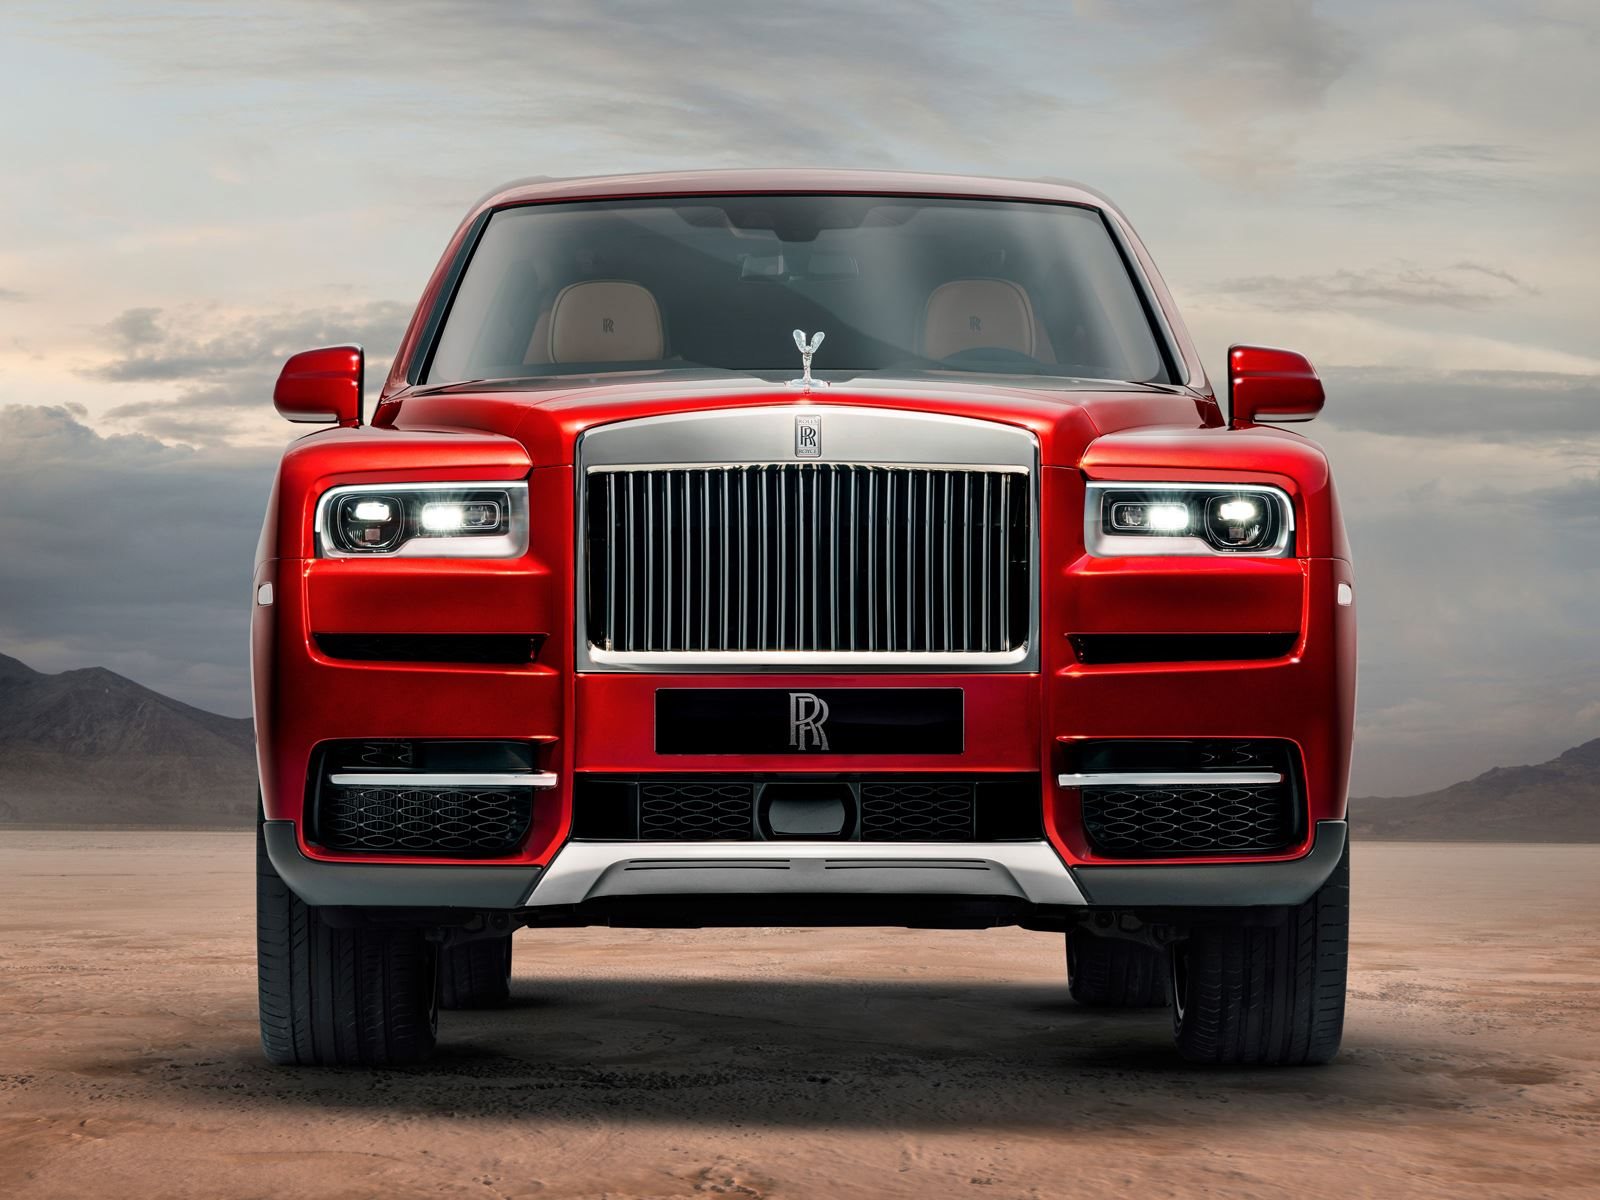 How Much Is a Rolls-Royce? Here's a Price Breakdown